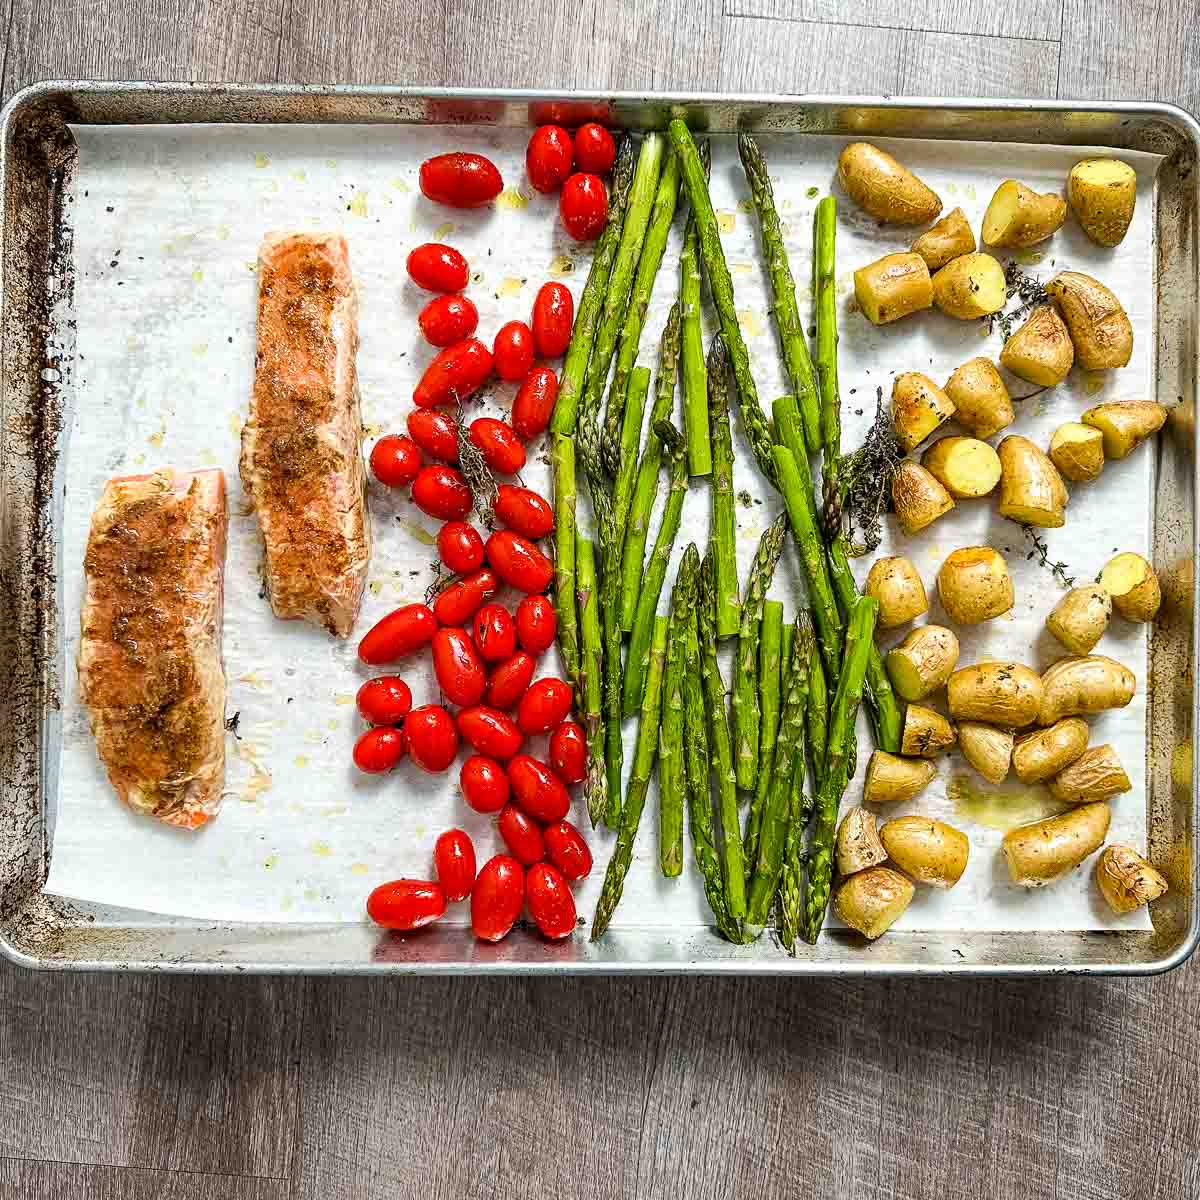 Salmon, cherry tomatoes, asparagus, and fingerling potatoes on lined sheet pan.